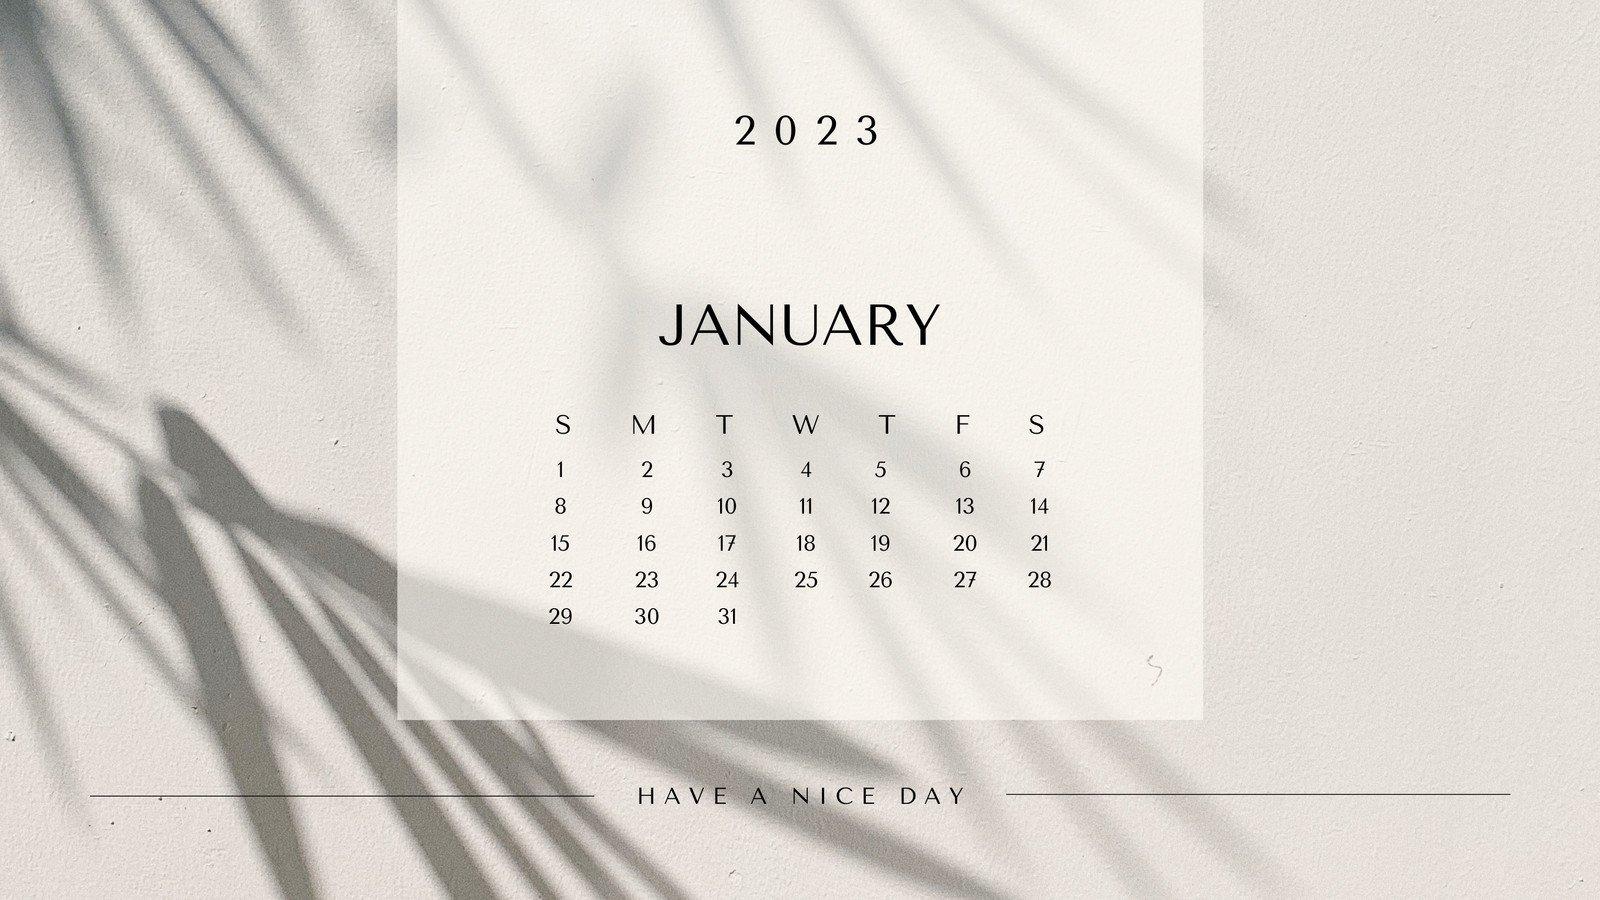 January 2022 Calendar Wallpaper Images  Free Photos PNG Stickers  Wallpapers  Backgrounds  rawpixel